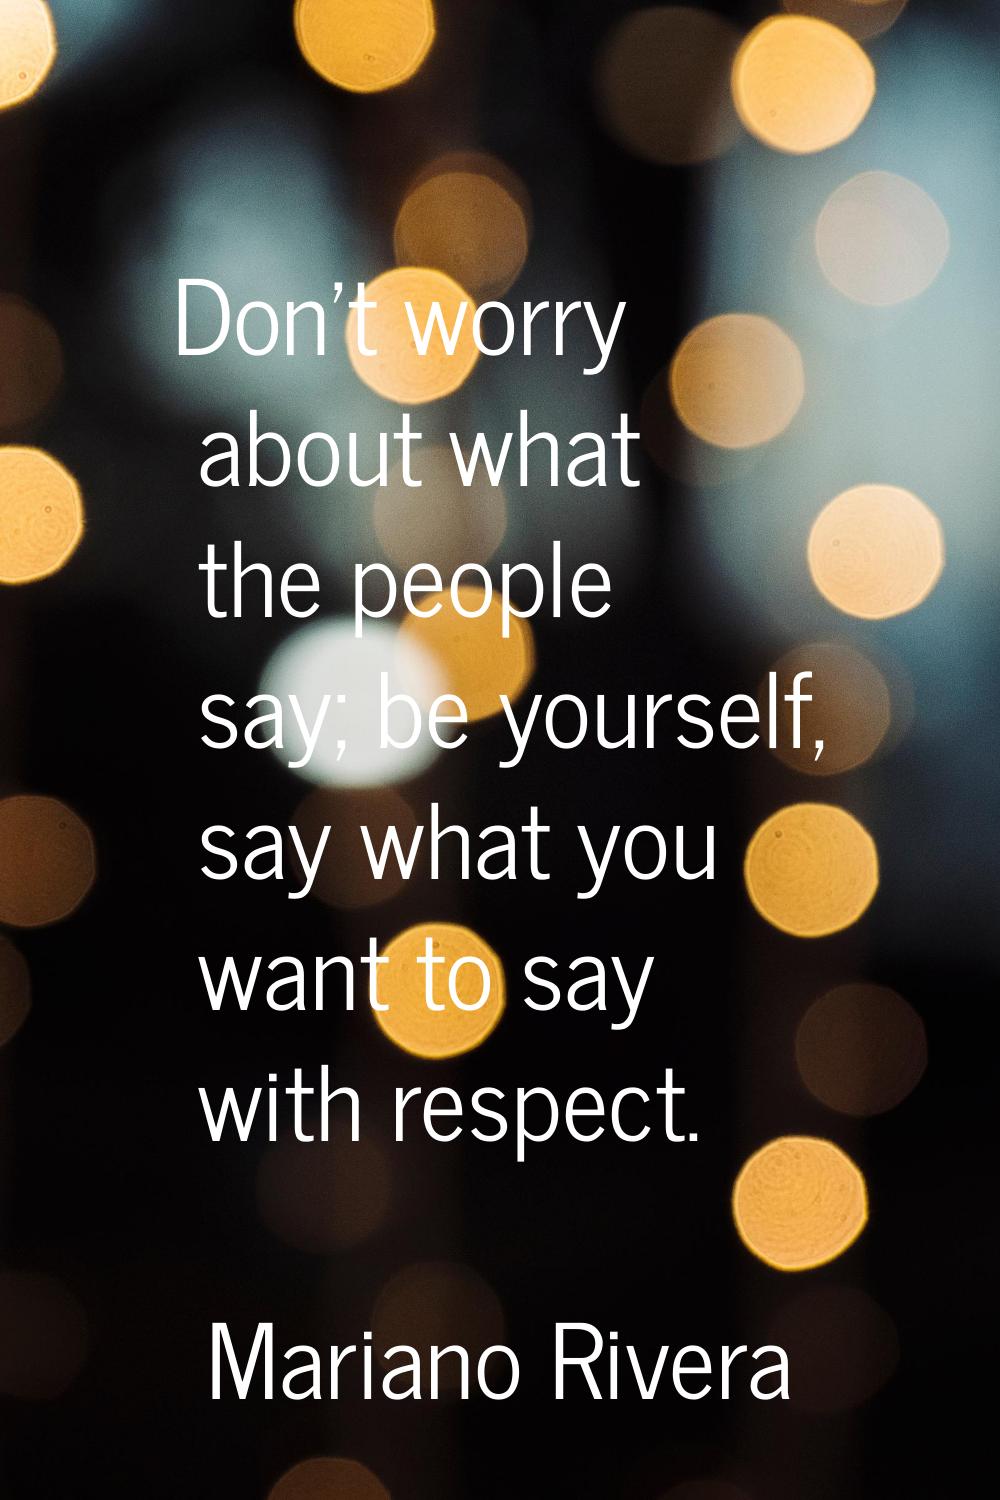 Don't worry about what the people say; be yourself, say what you want to say with respect.